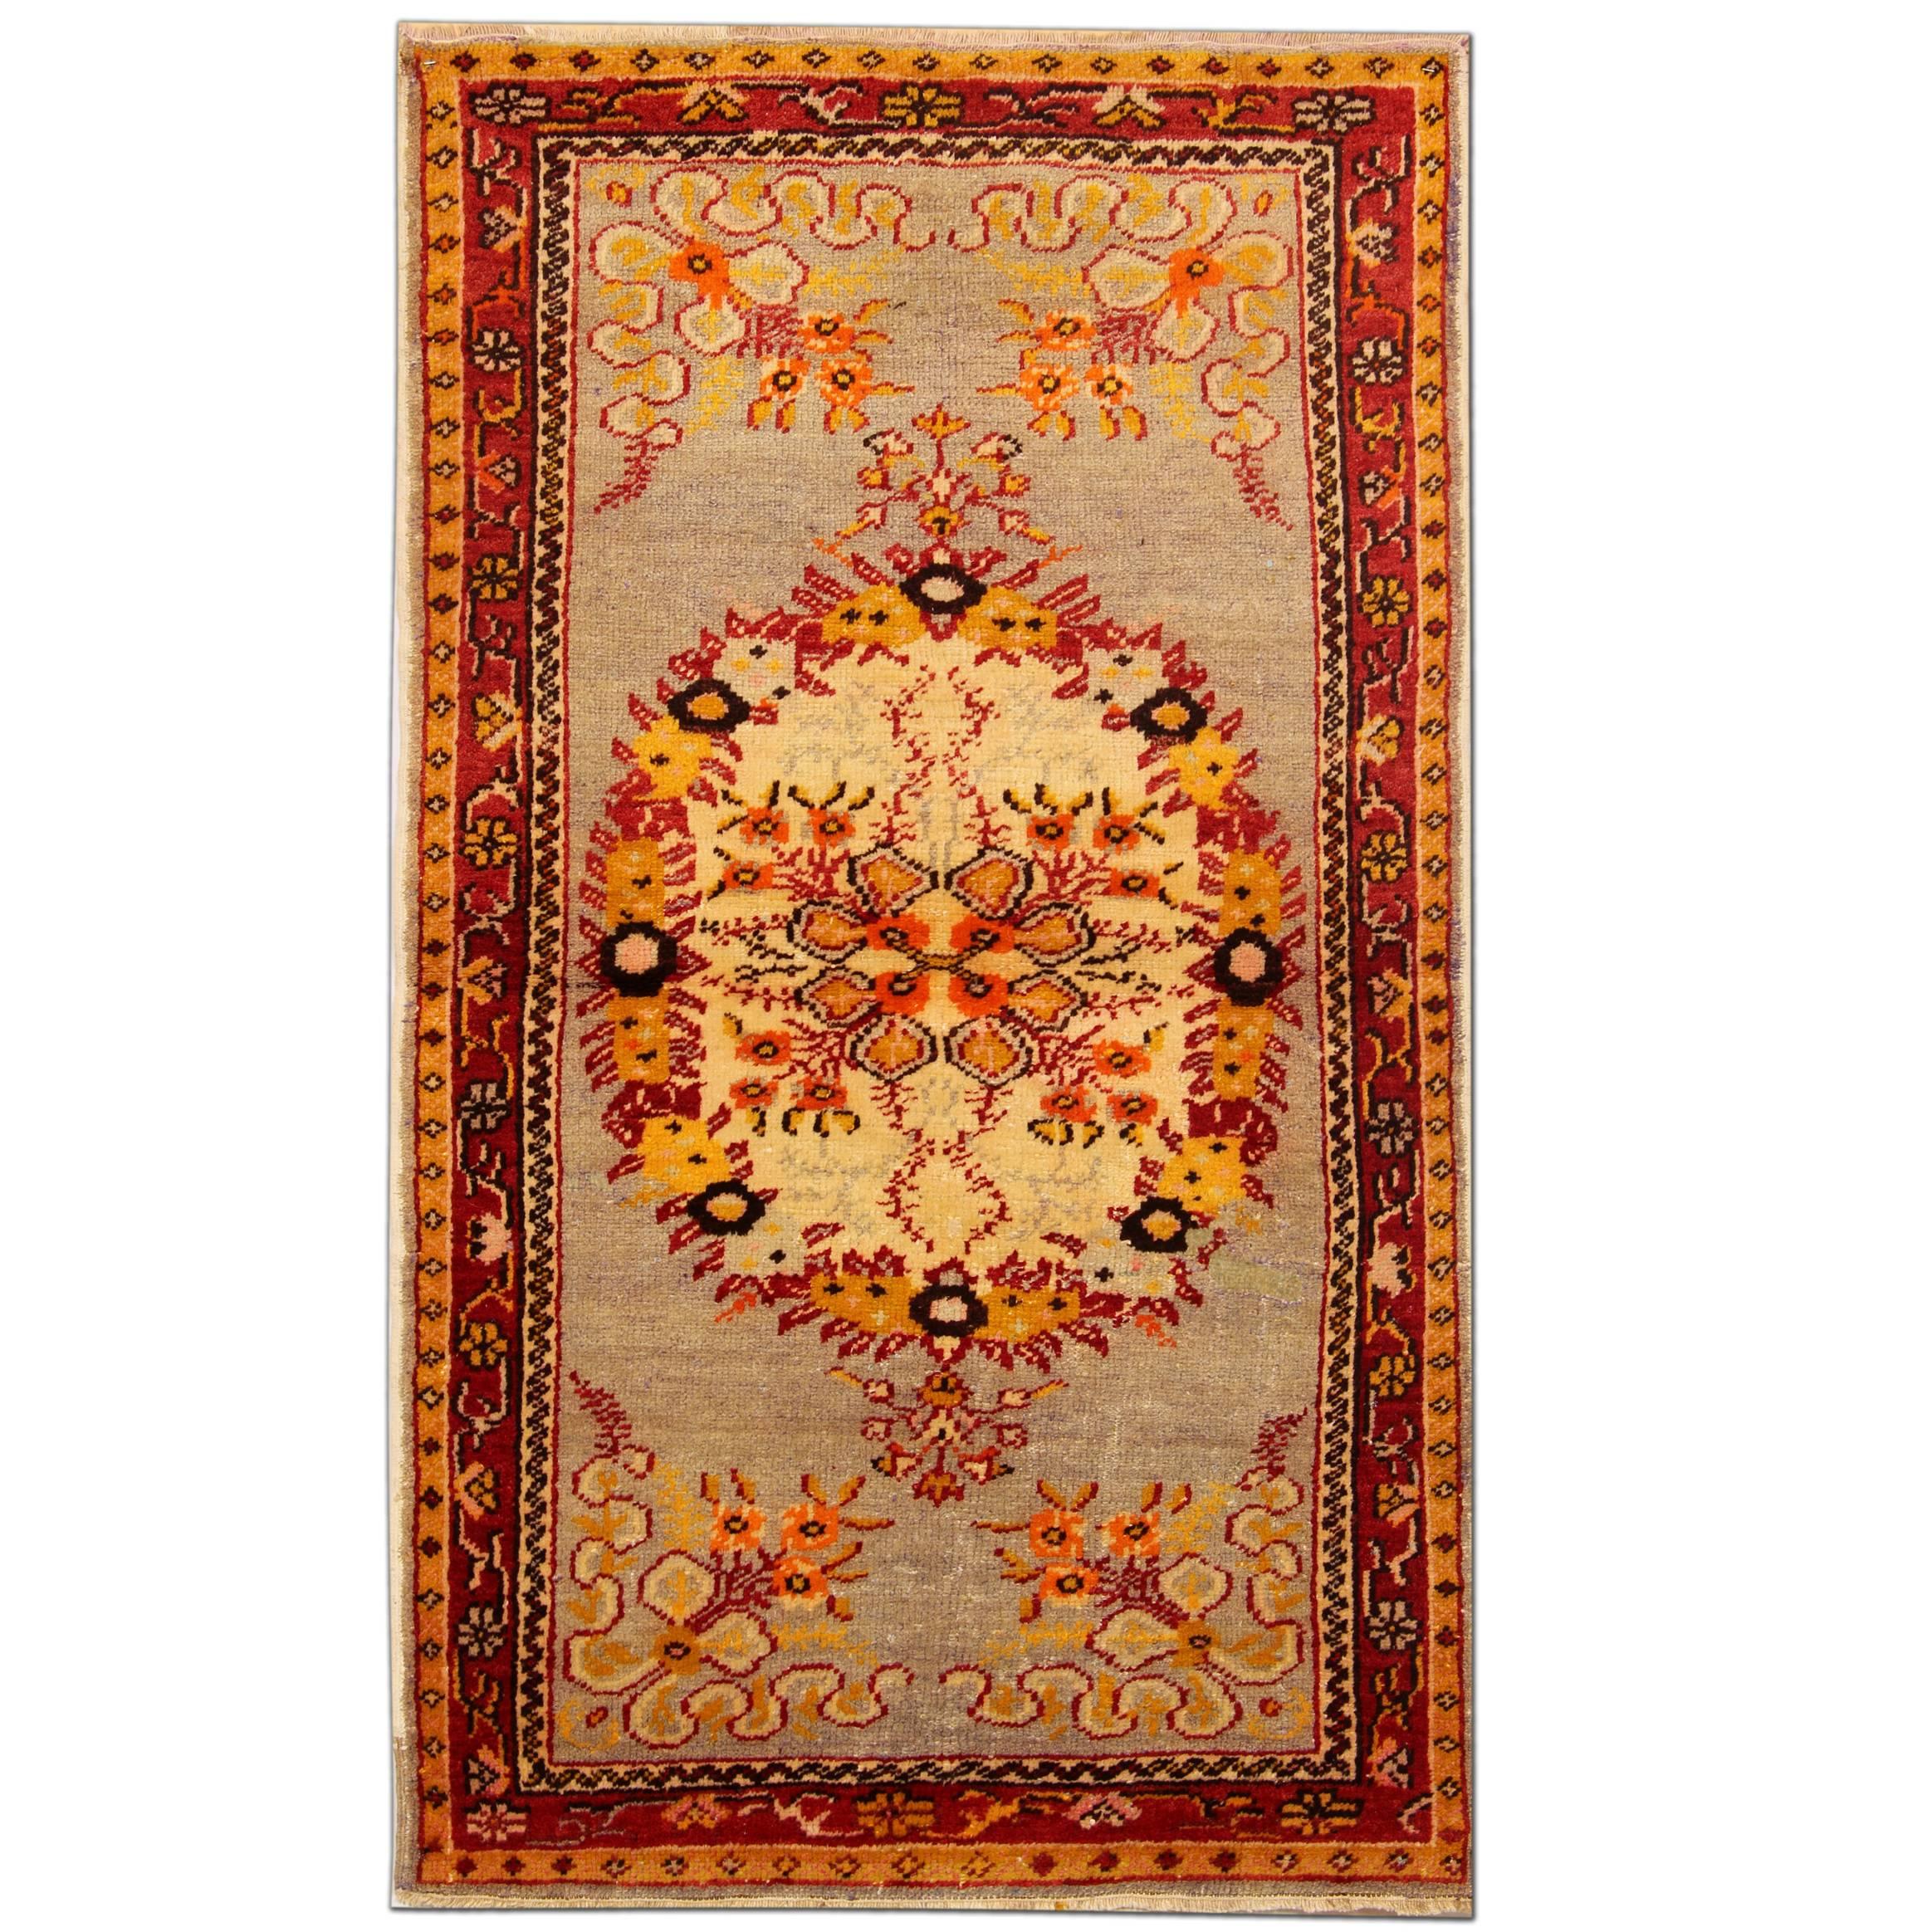 Antique Turkish Rugs Oriental Antique Rugs, Gold Rug from Anatolia Floor Rug